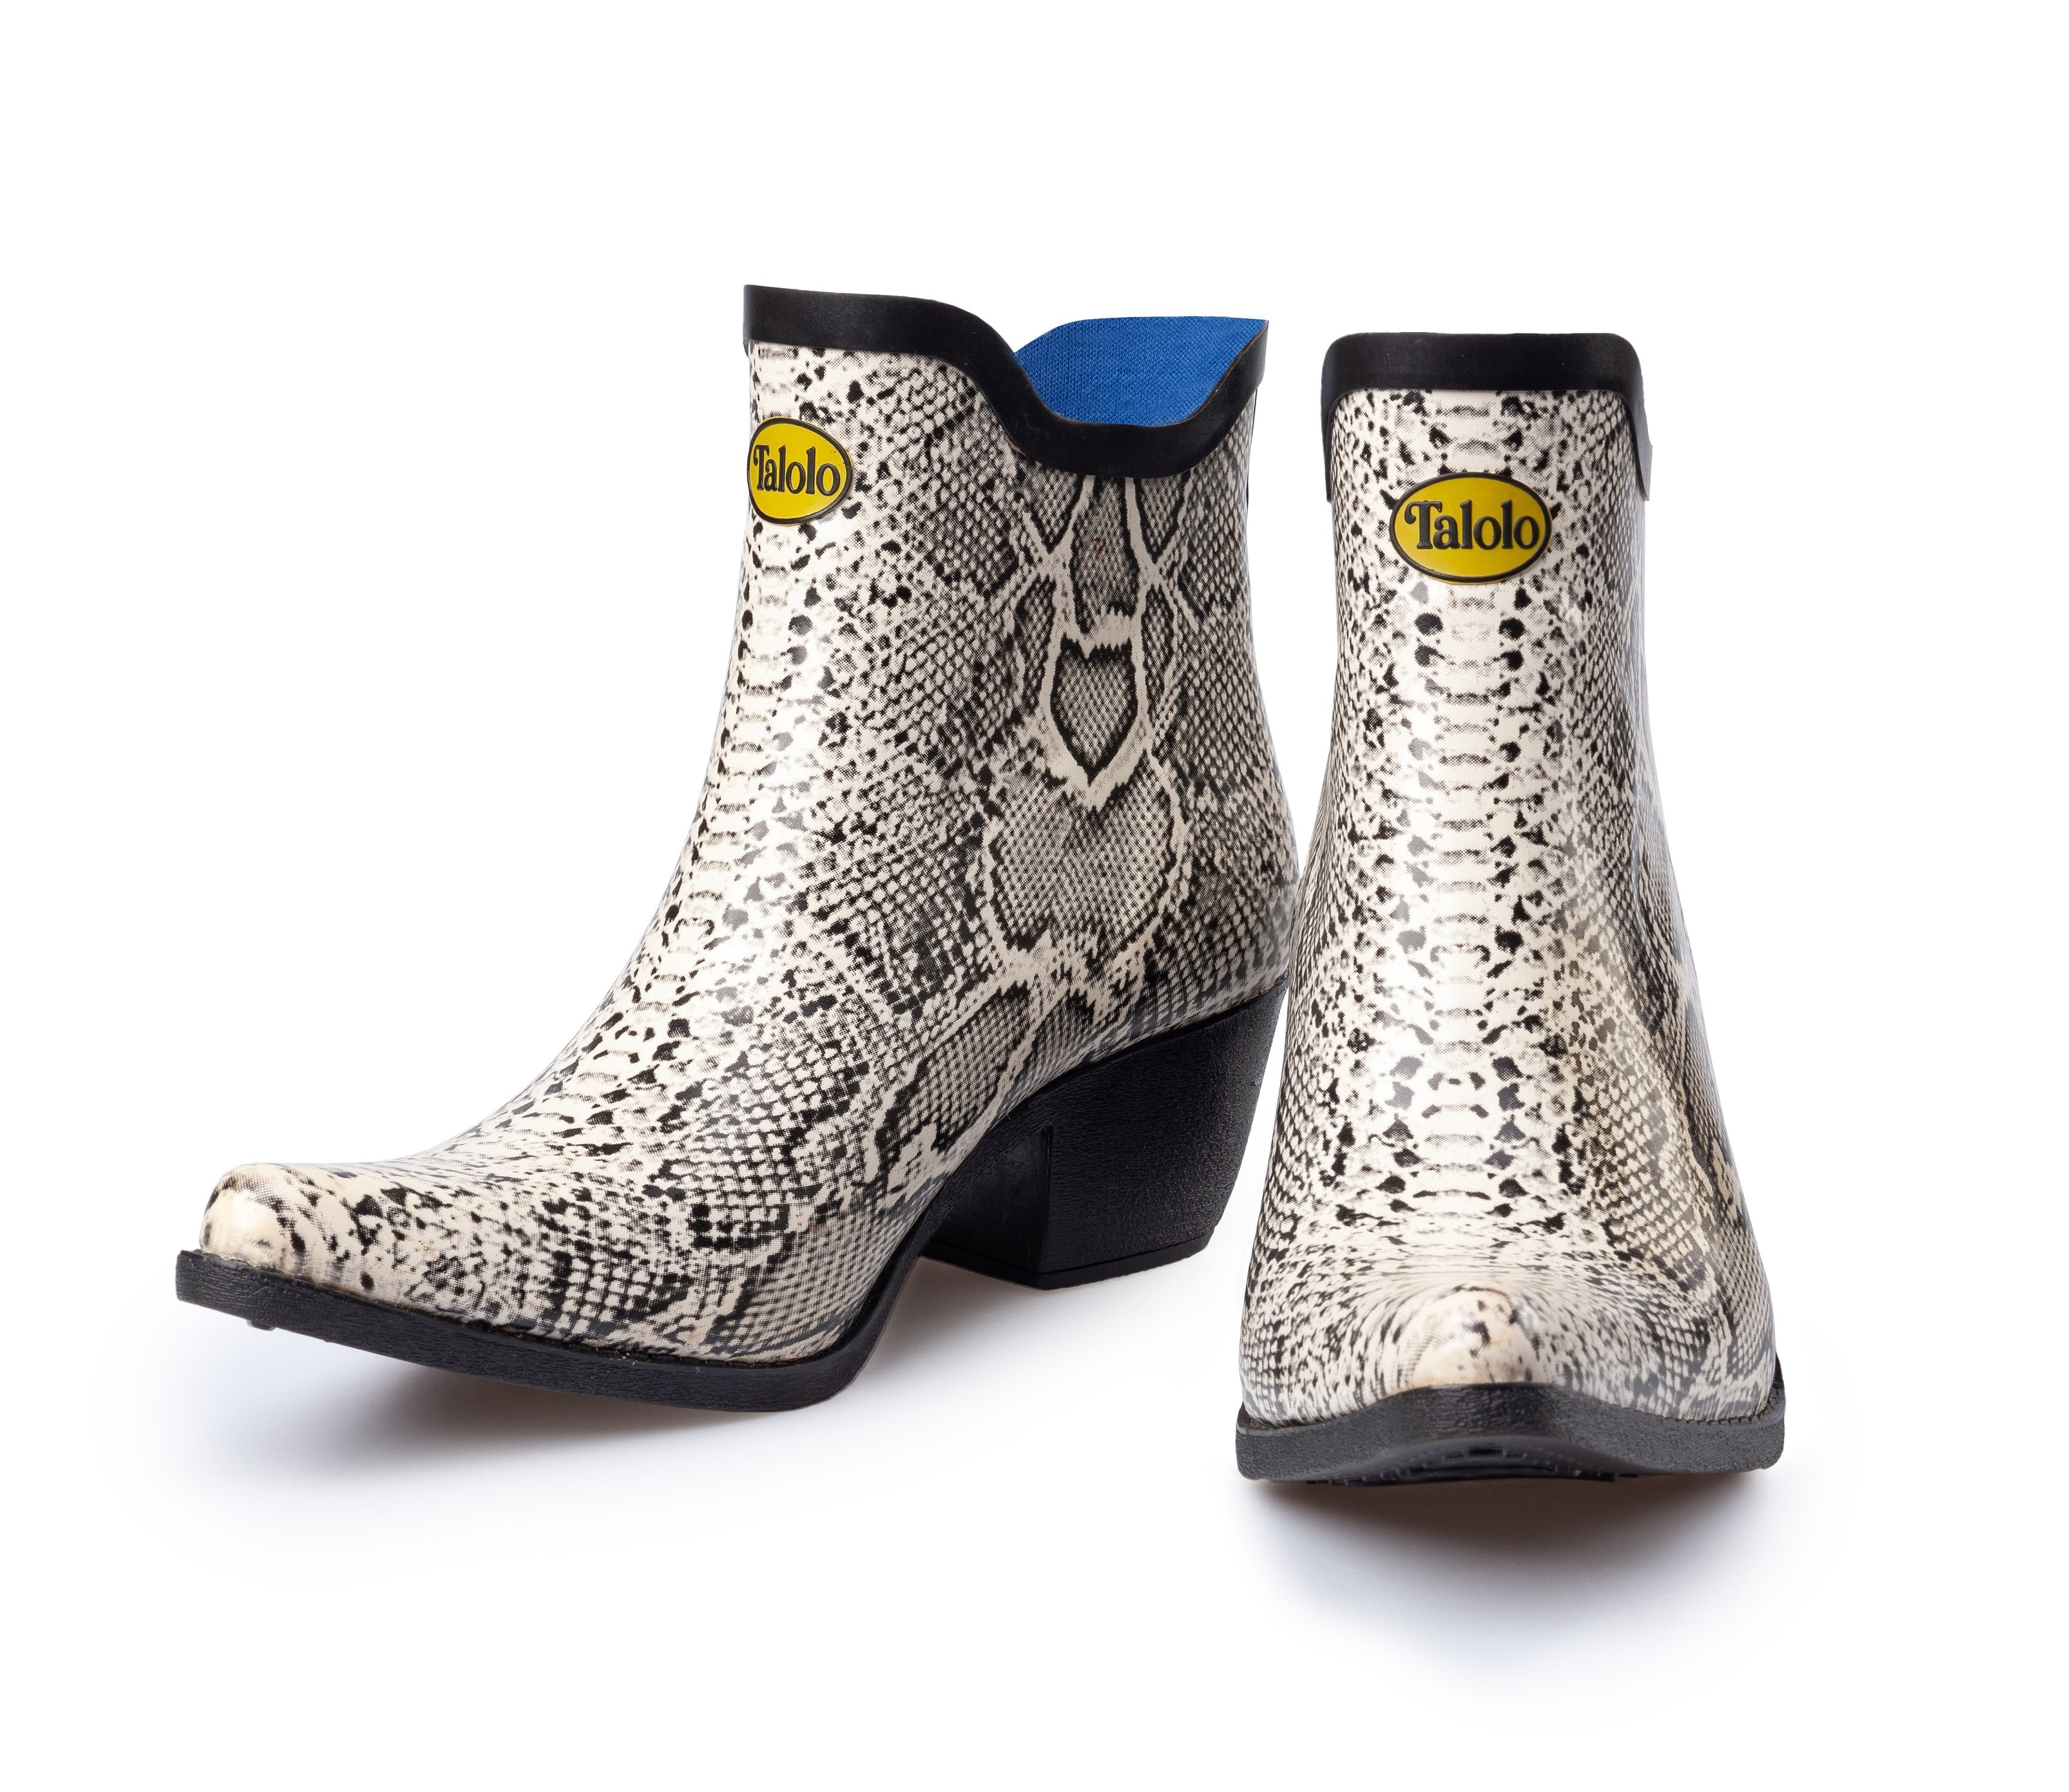 Chic and stylish, these Talolo Women's Lizzie snake print black and white pointed cowboy welly ankle boots have a 3cm heel. Lined for comfort.